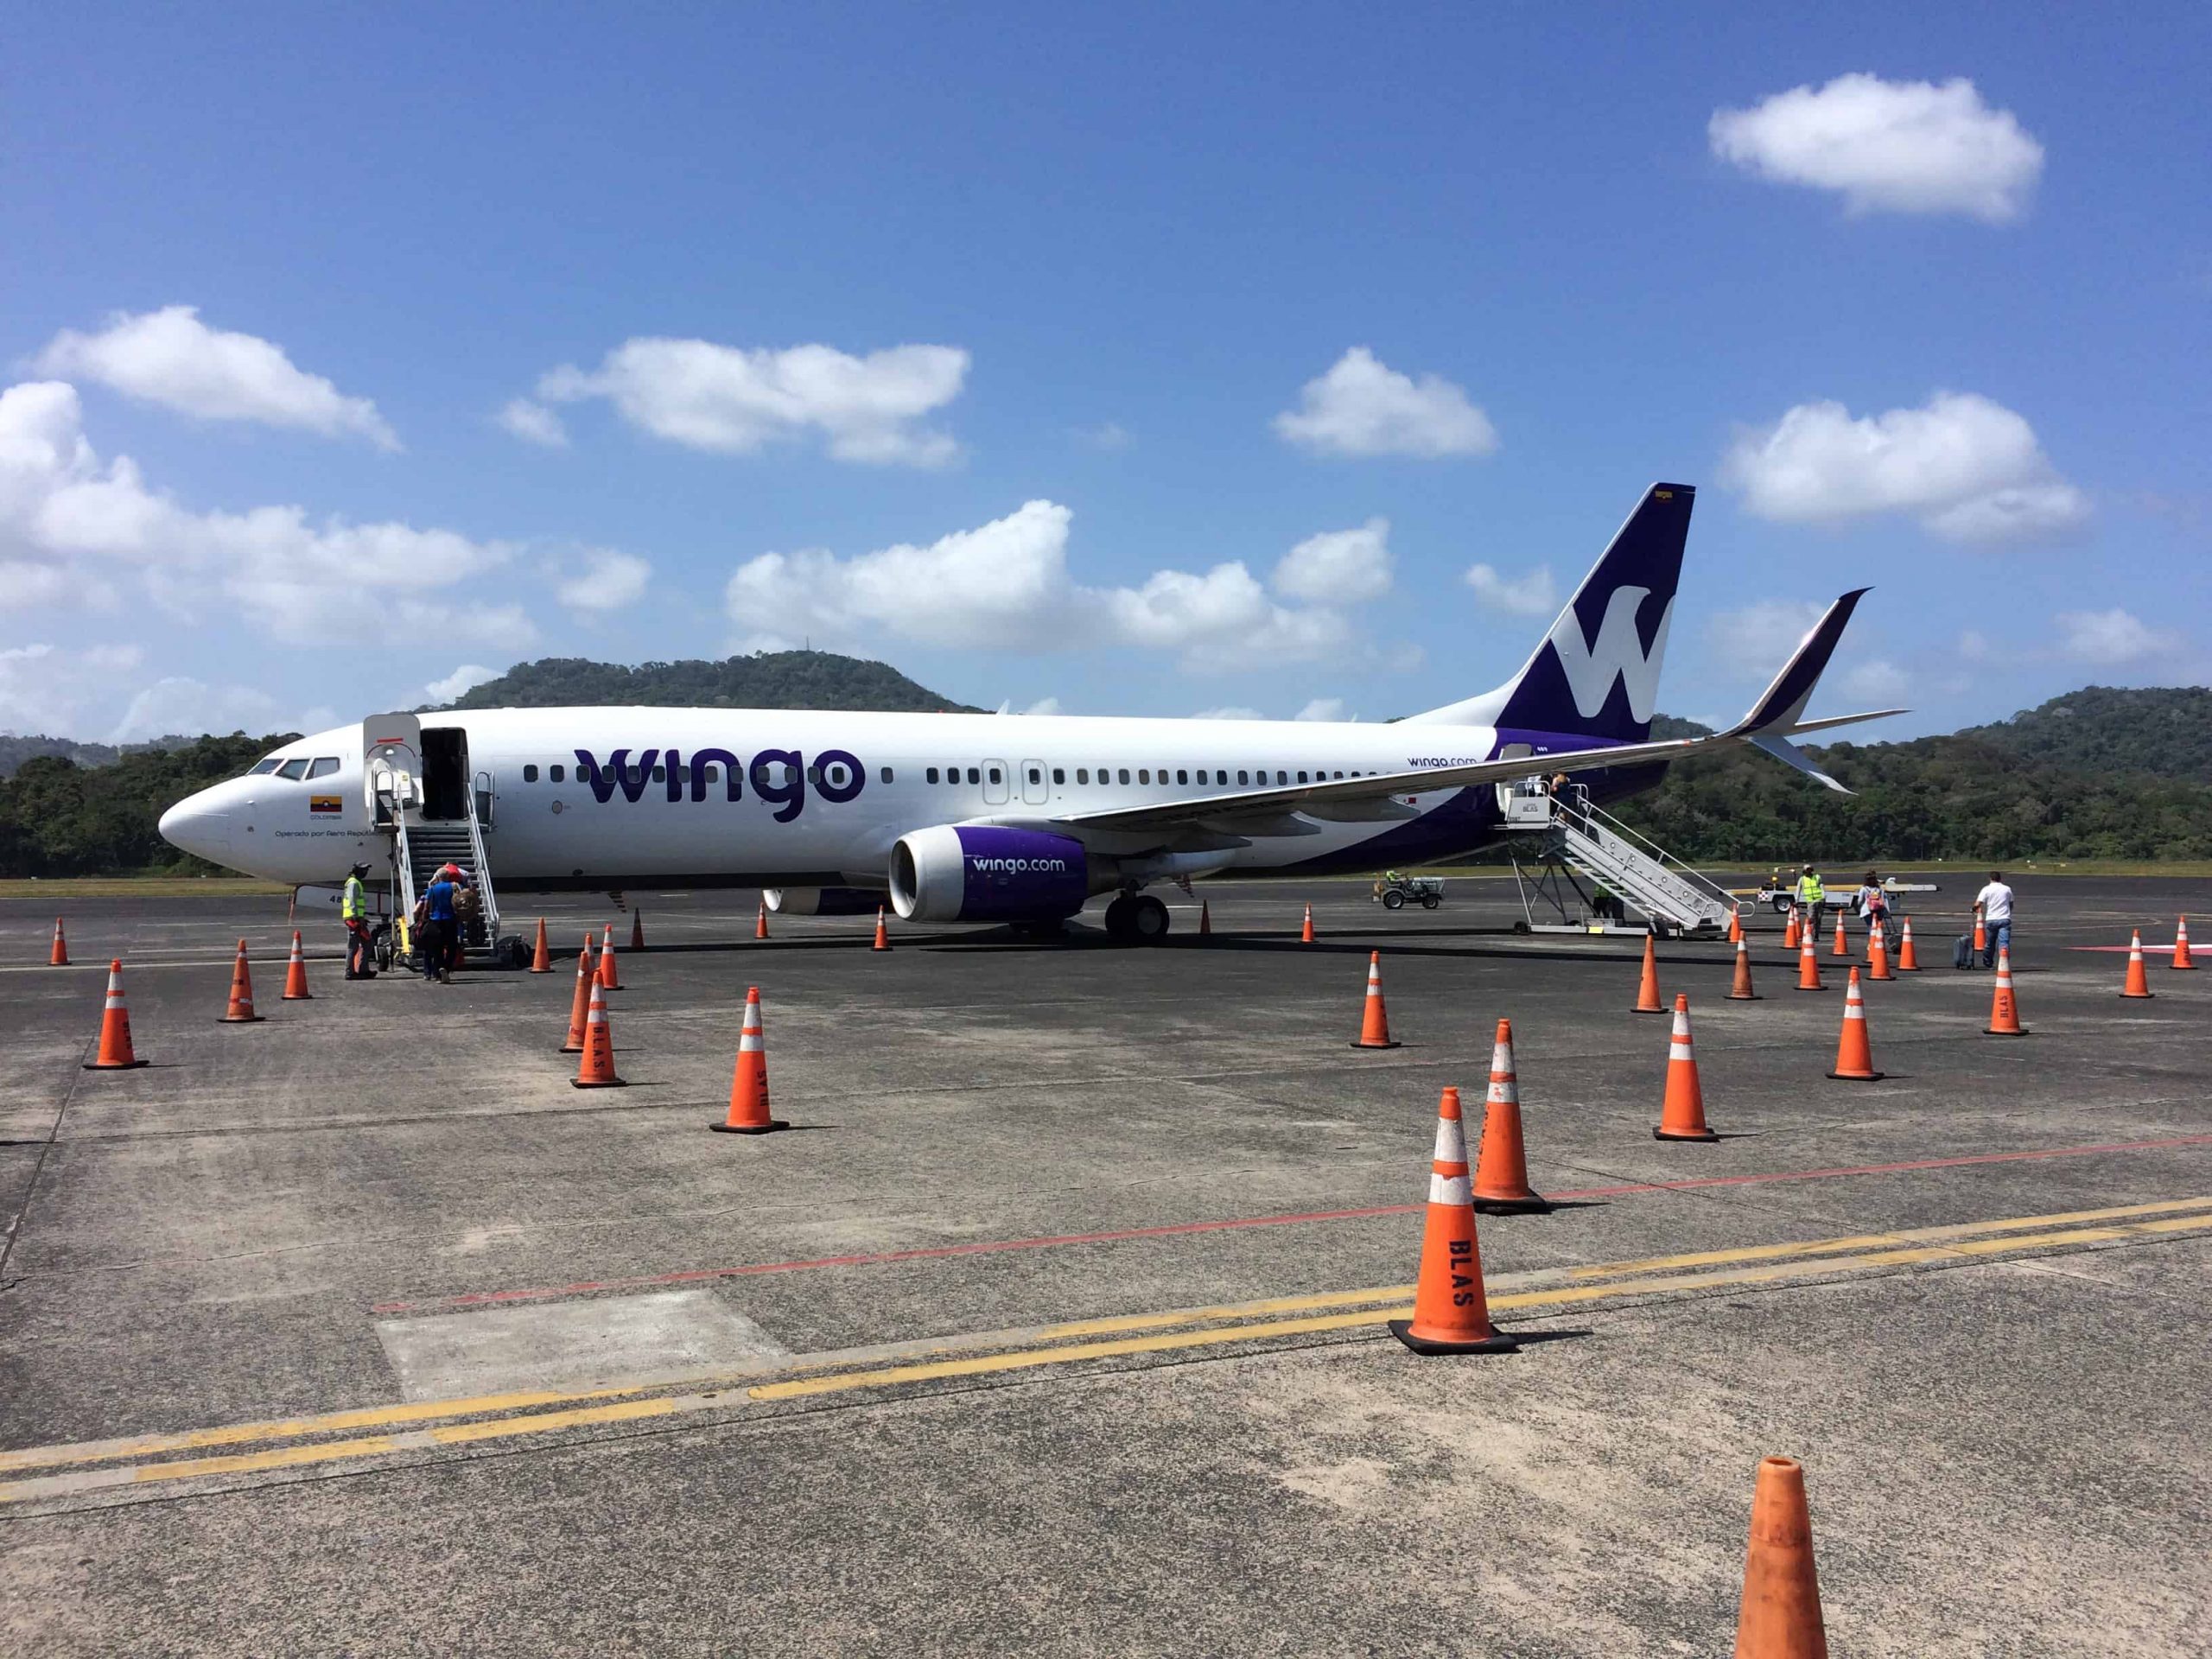 Copa Boeing 737-800 involved in runway excursion in Panama City, News